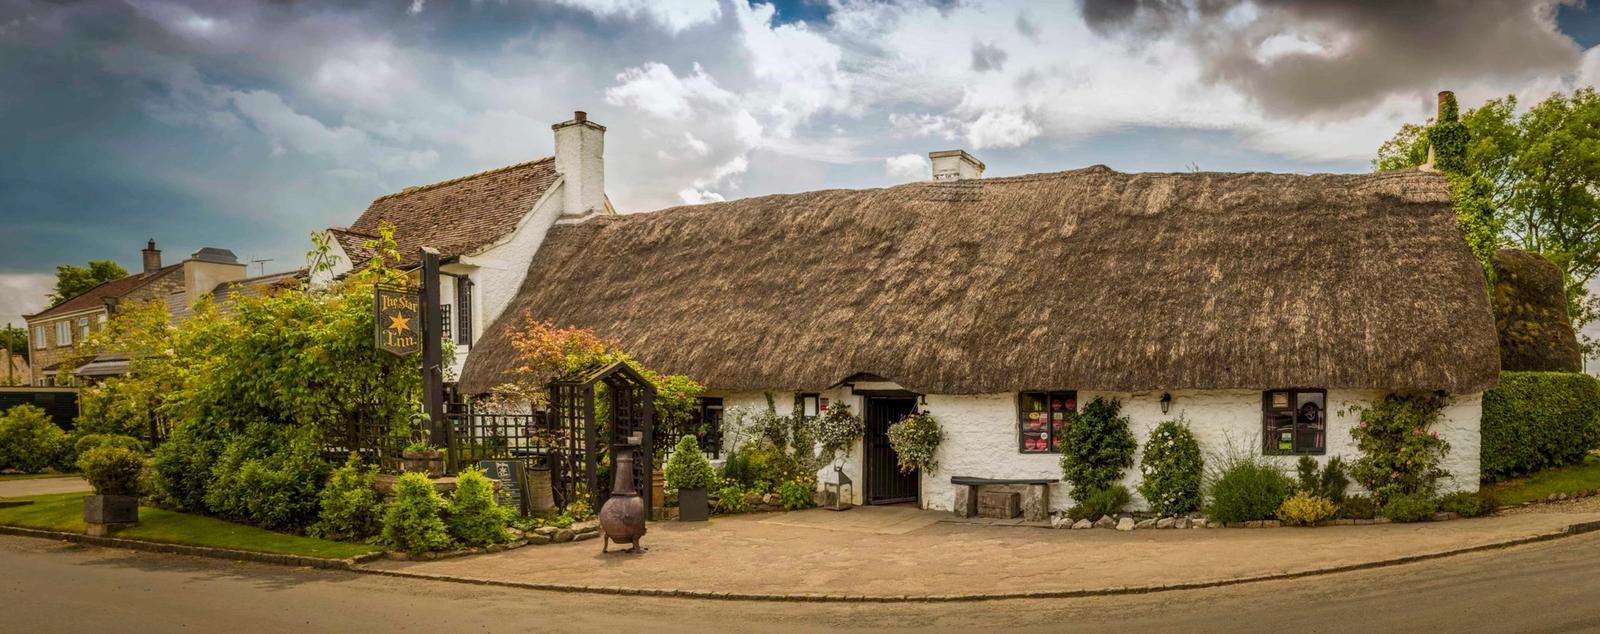 Best gastro pubs with rooms in Yorkshire